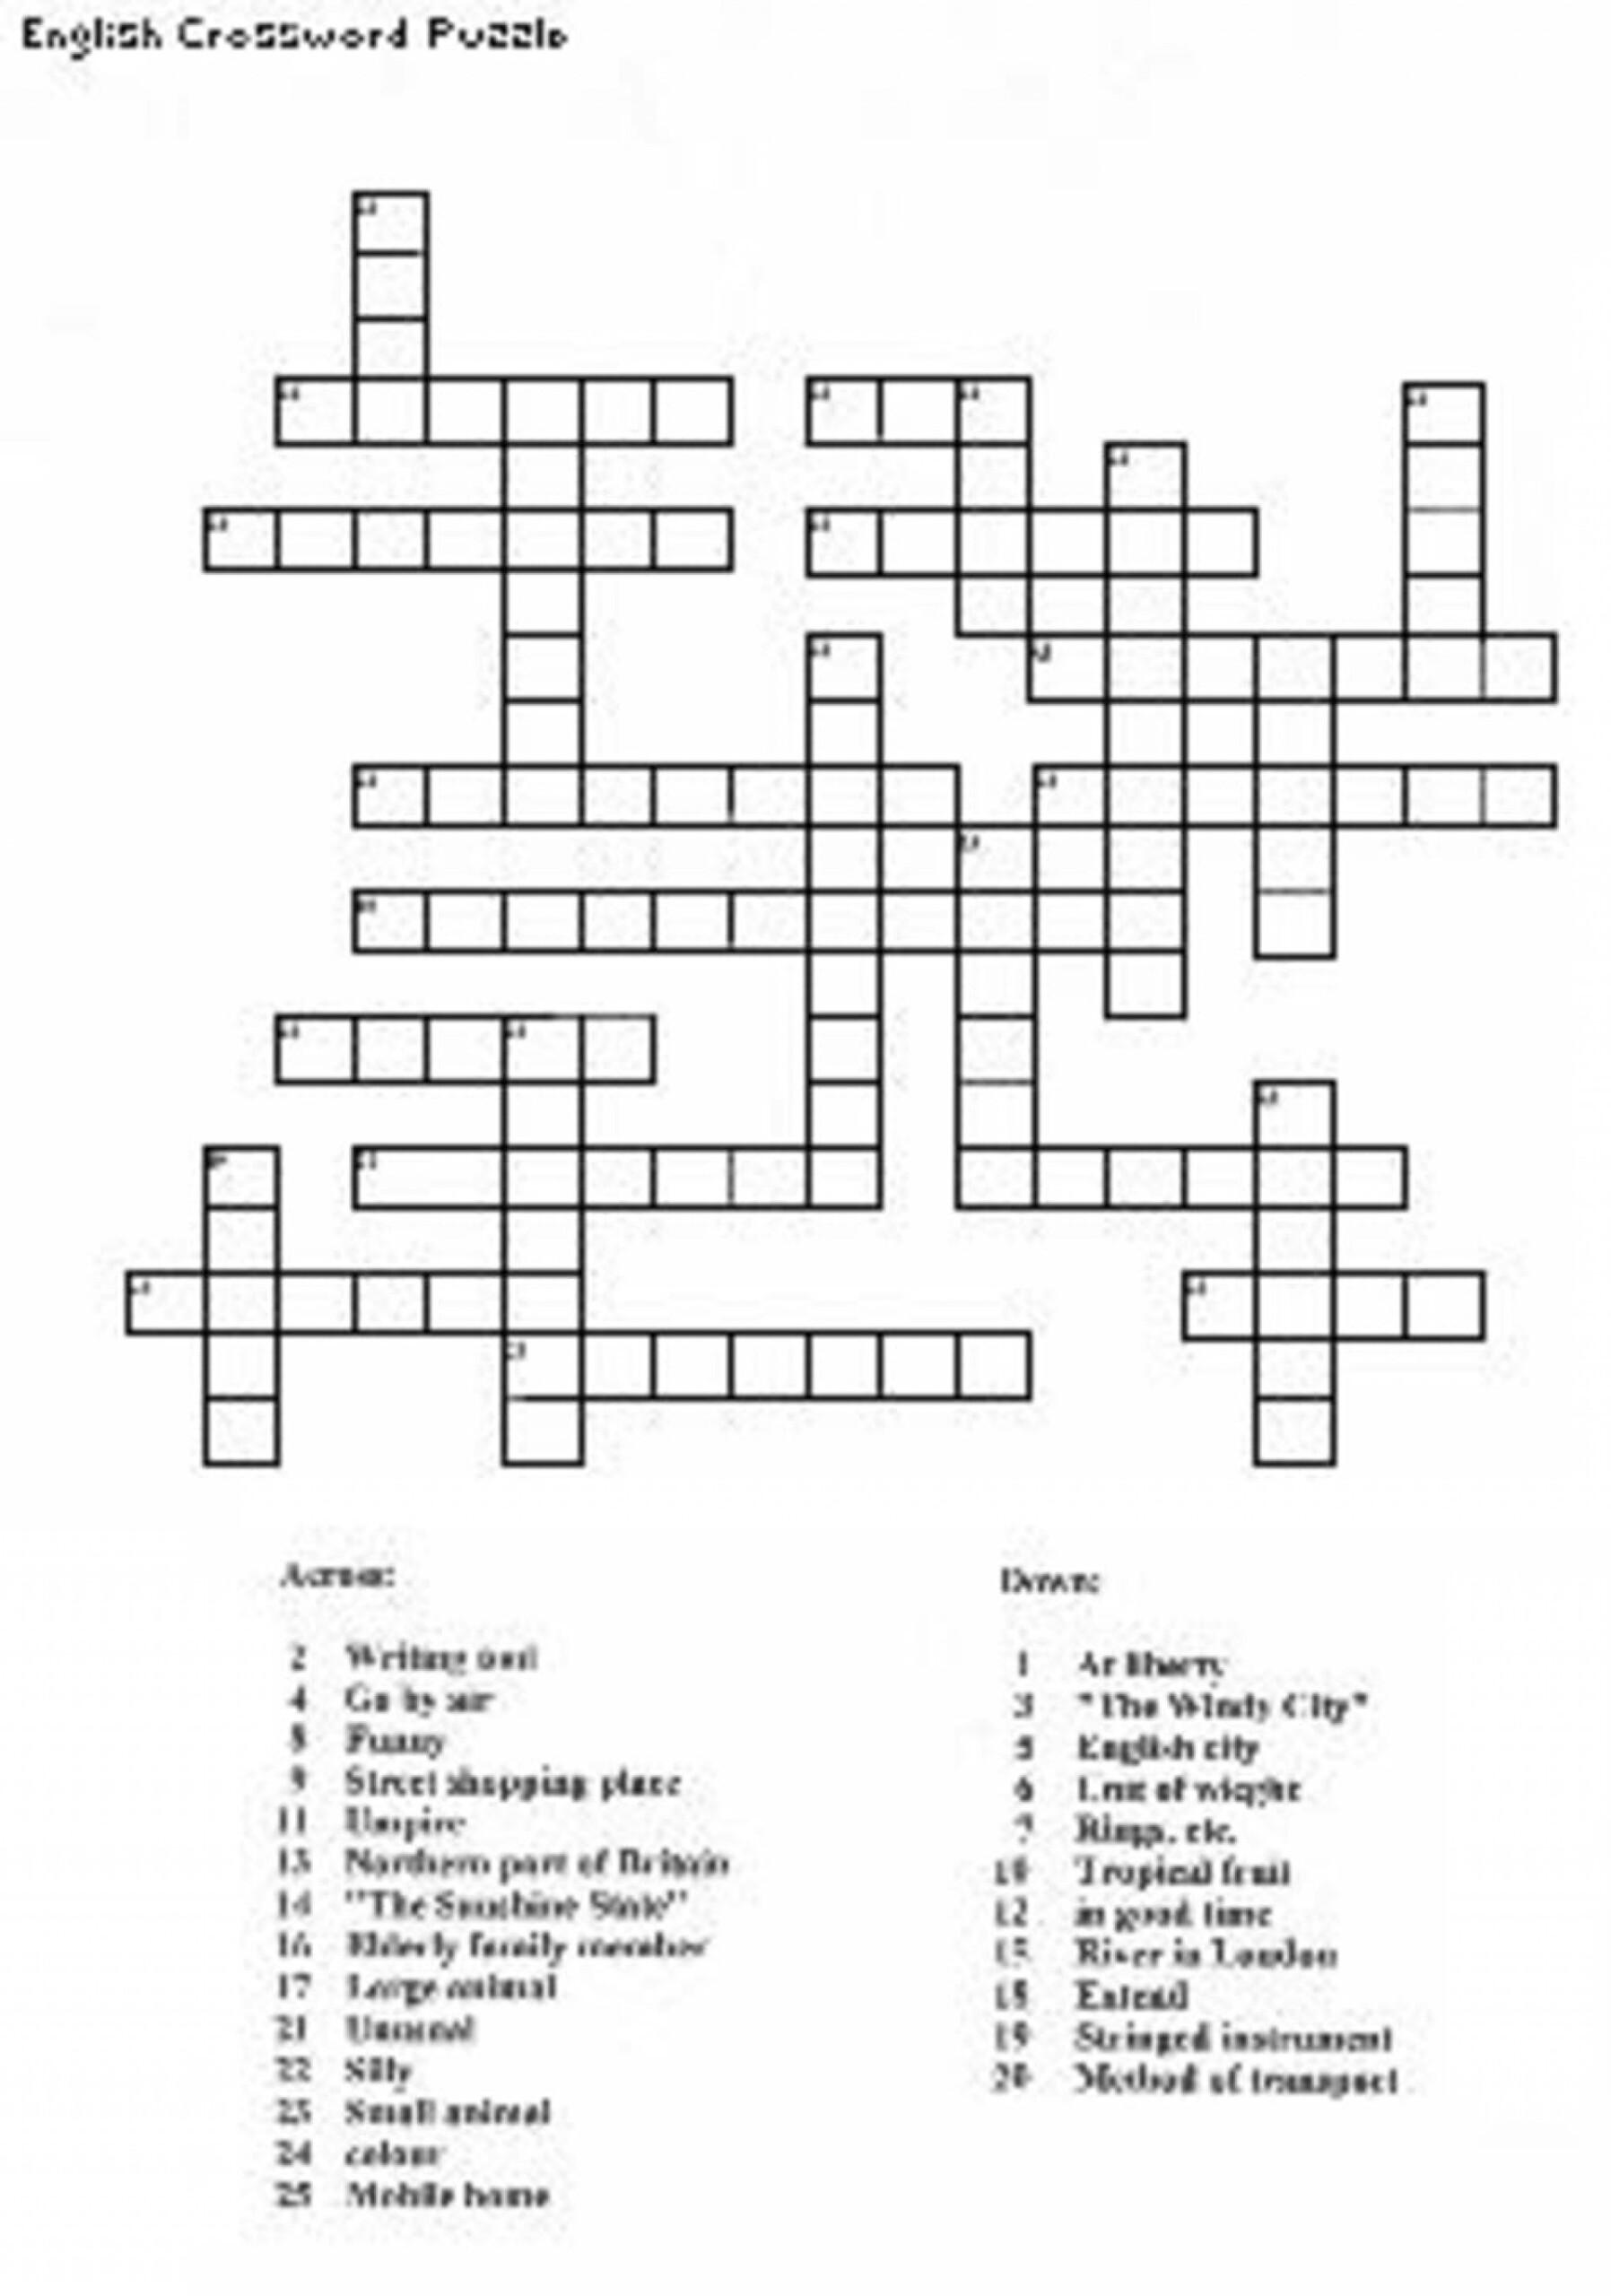 Make Your Own Crossword Puzzle Free Printable Printable Crossword Puzzles - Make Your Own Crossword Puzzle Easy